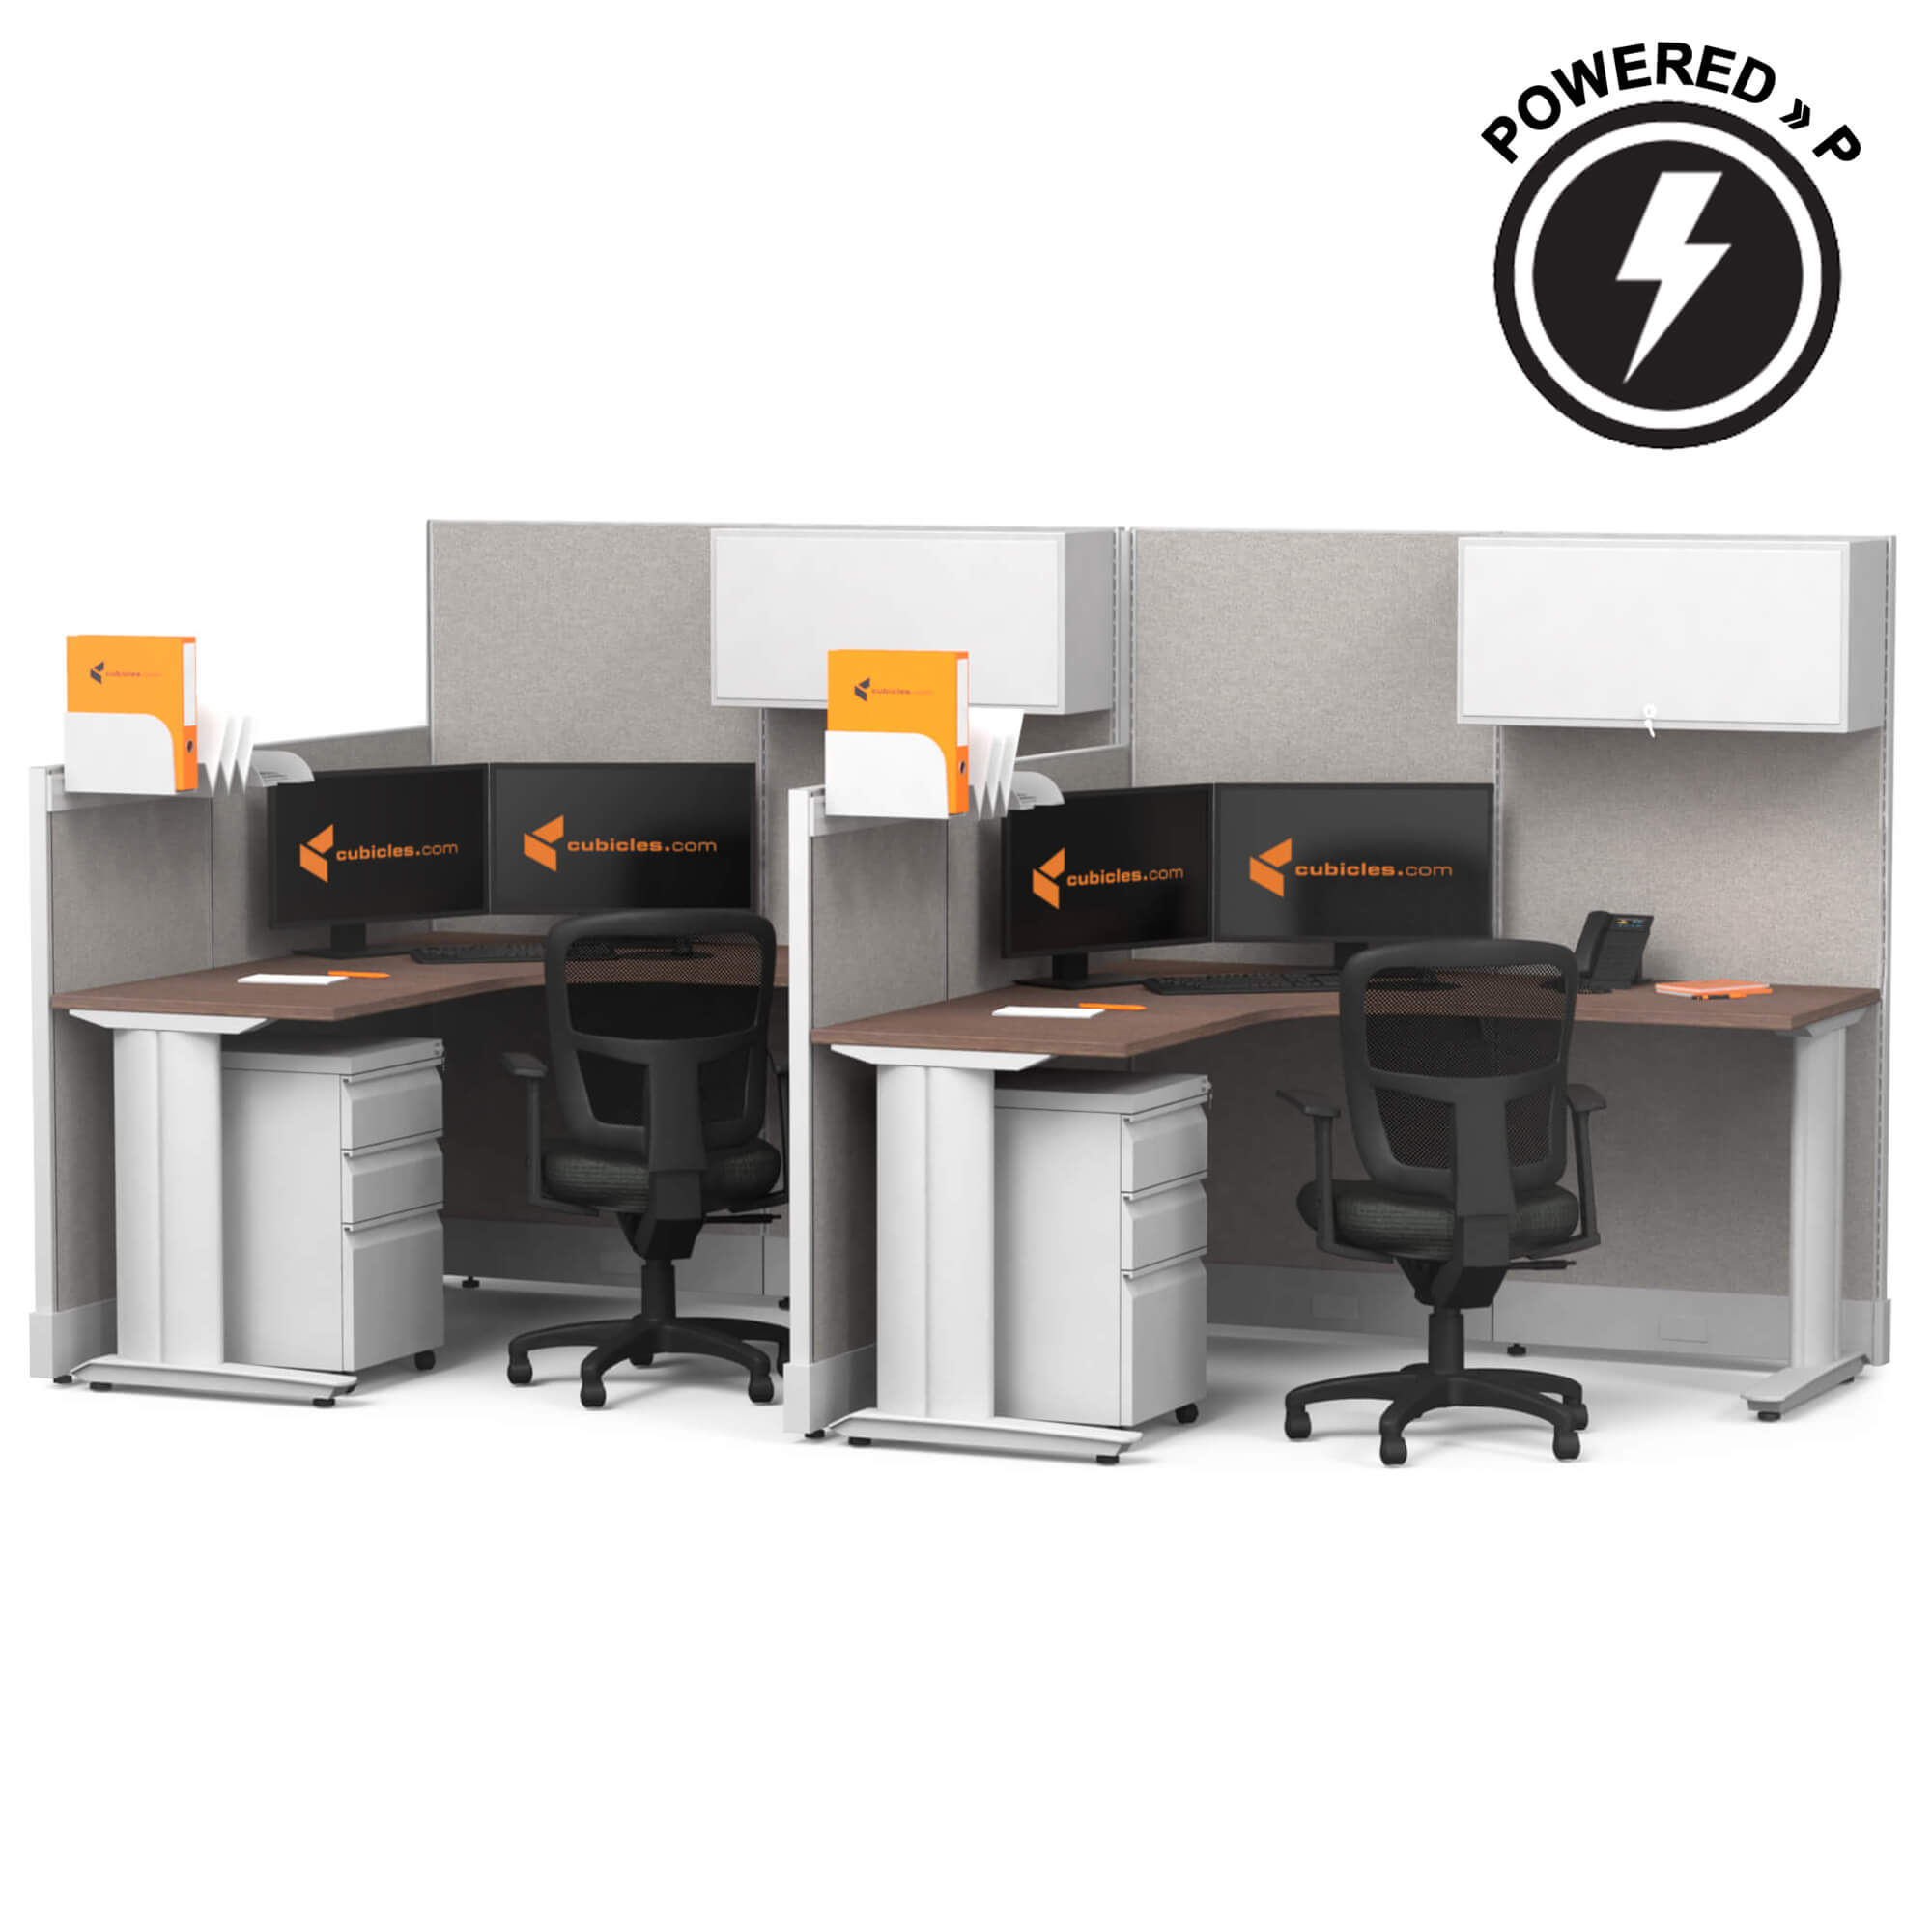 cubicle-desk-l-shaped-workstation-2pack-inline-powered-with-storage-sign.jpg